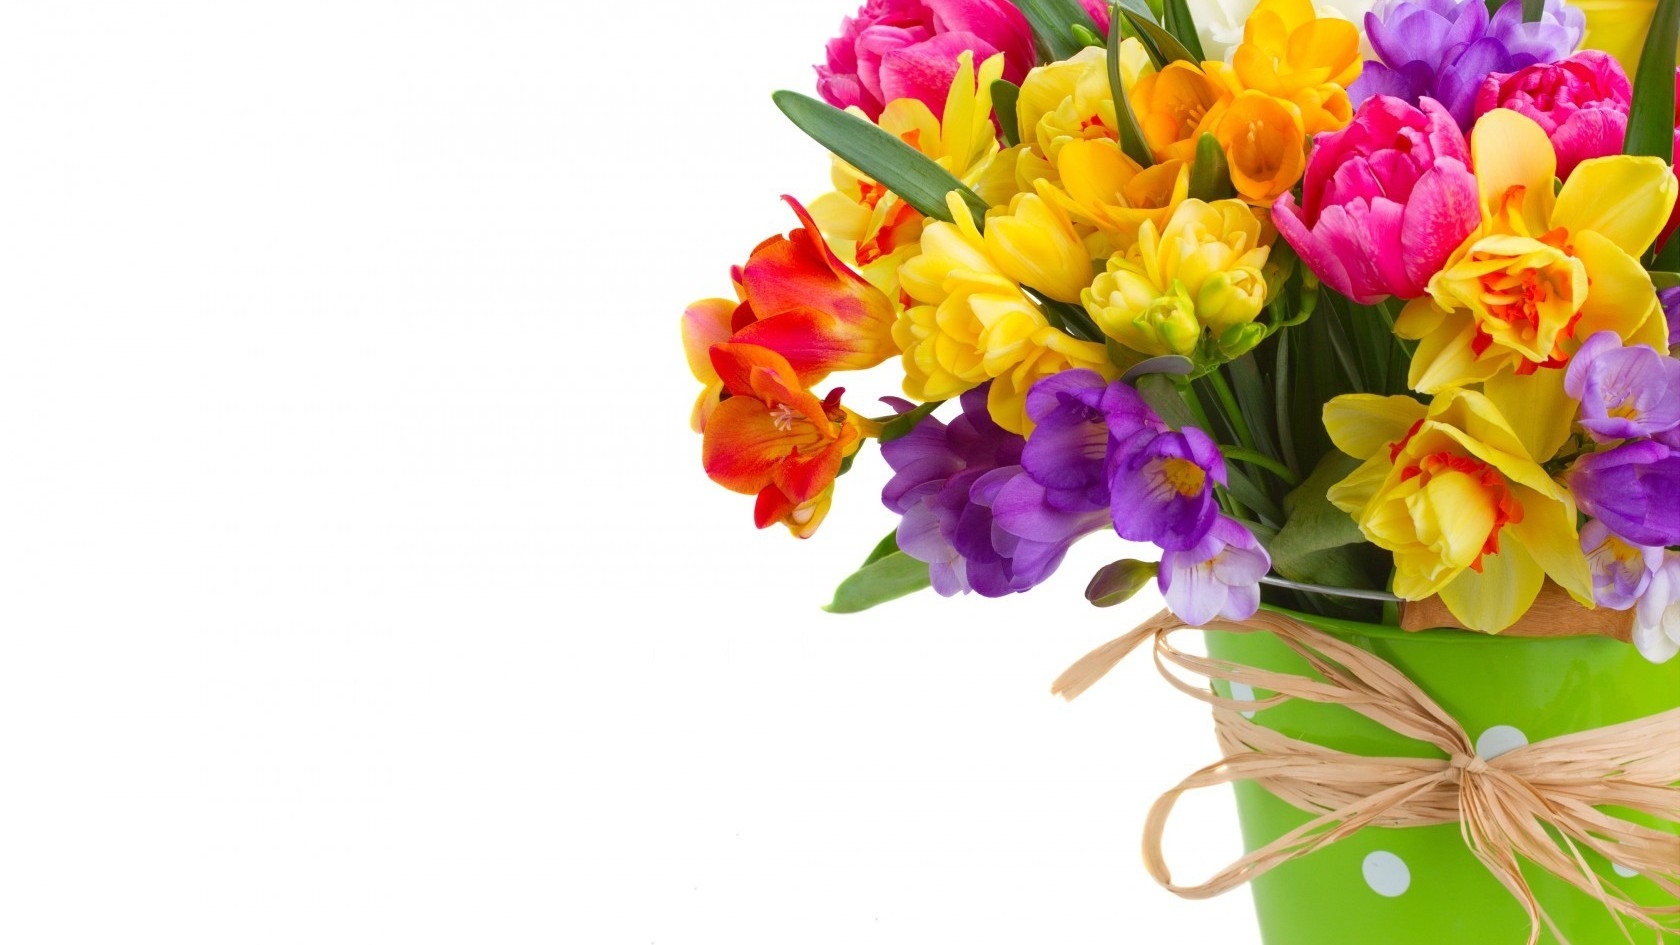 Daffodils and Freesias Bouquet for 1680 x 945 HDTV resolution